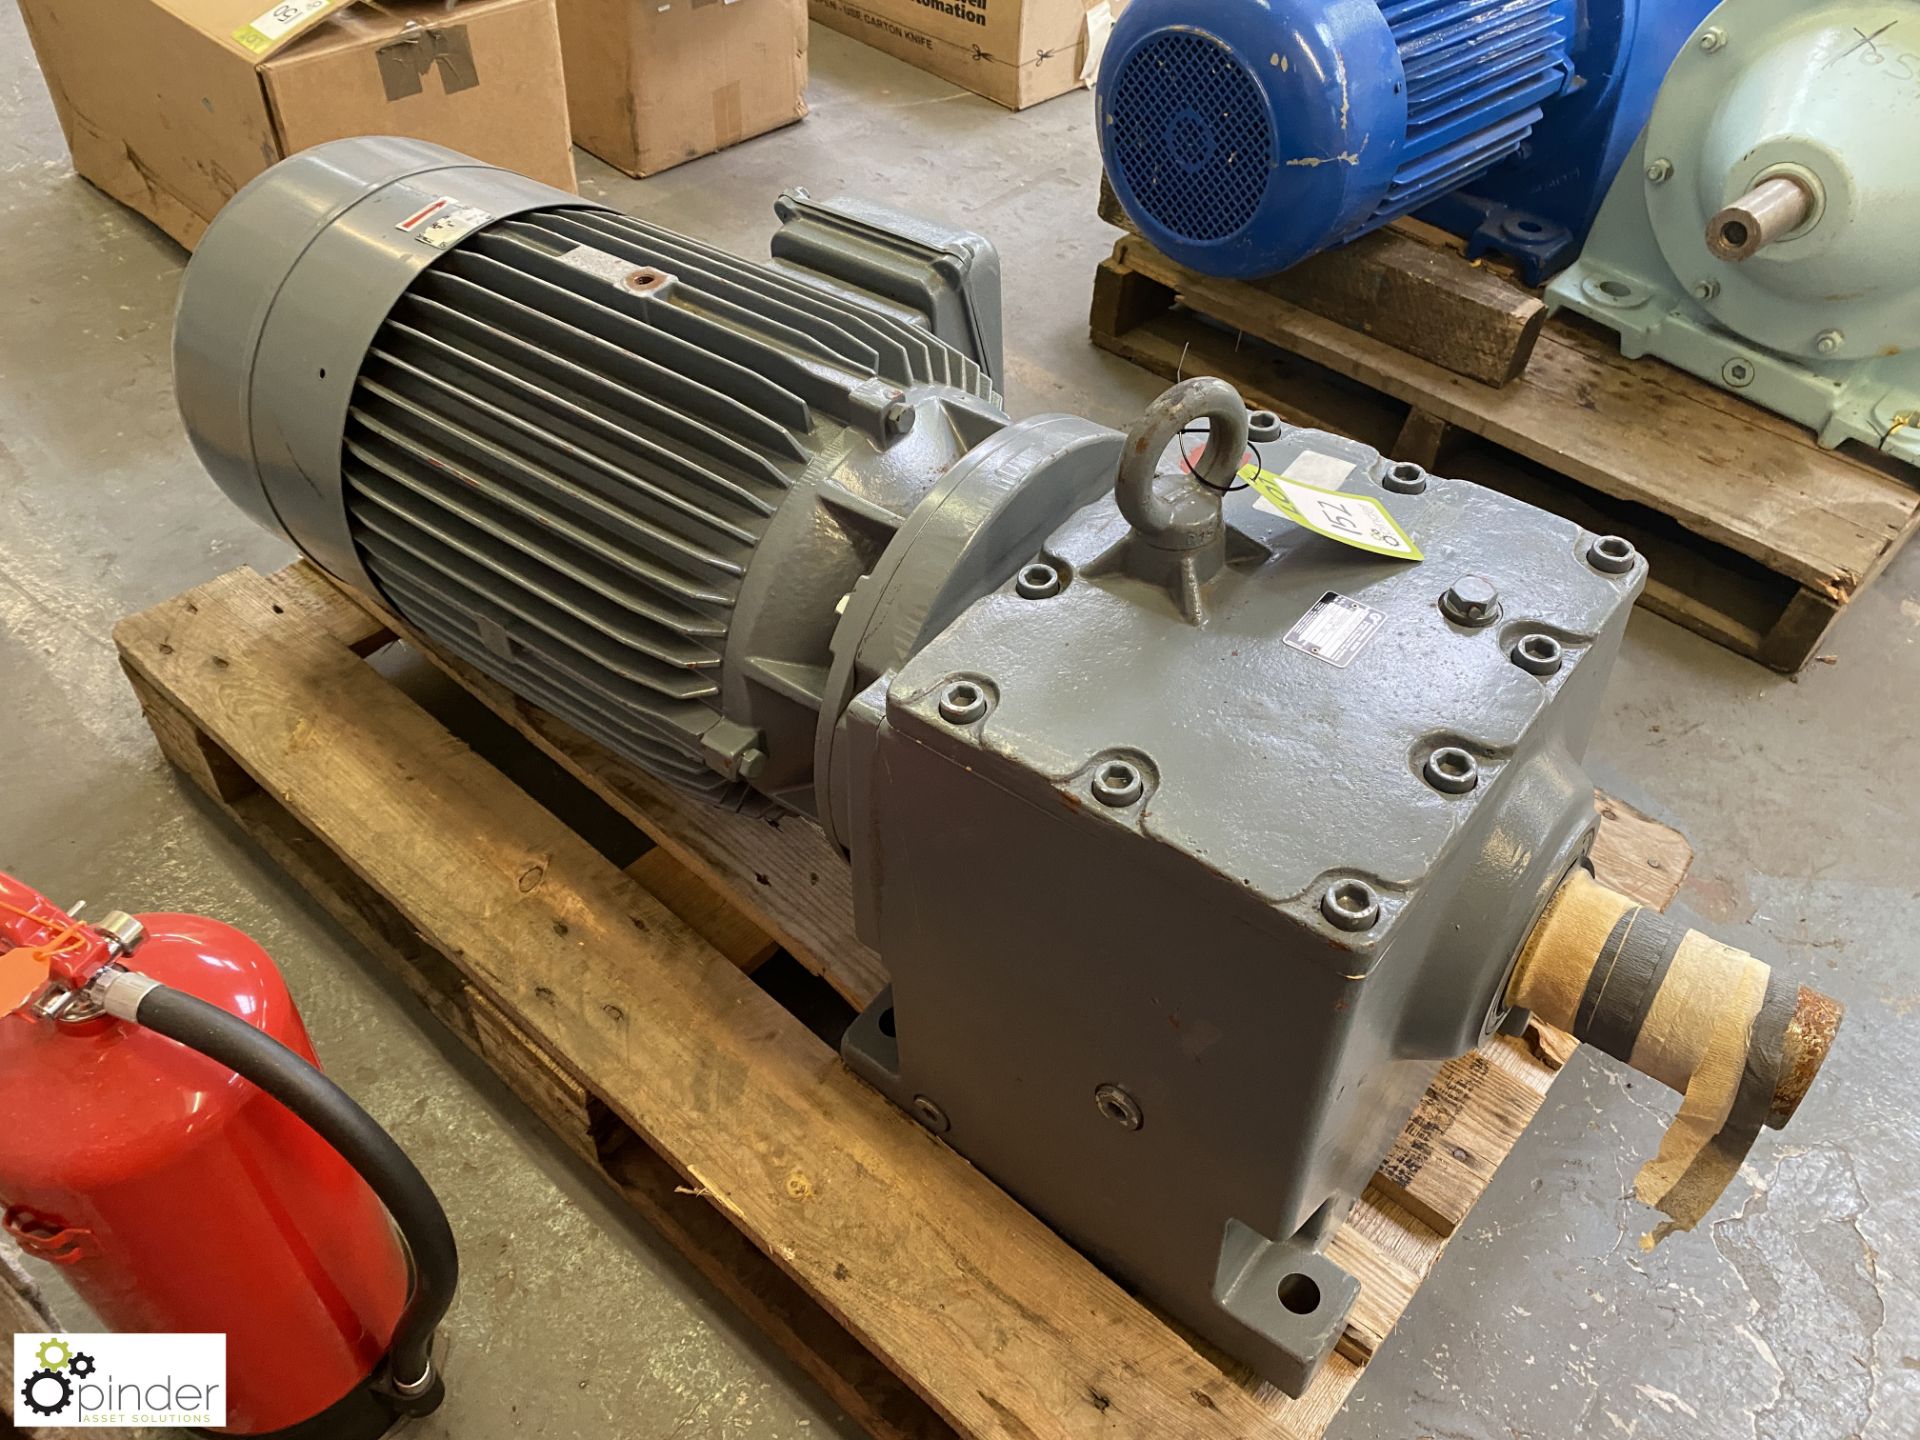 Nord Geared Motor 73-200 L4 CR50 ratio 23.34:1, 63rpm, braked 30kw Motor (Location Carlisle Site 1) - Image 2 of 5